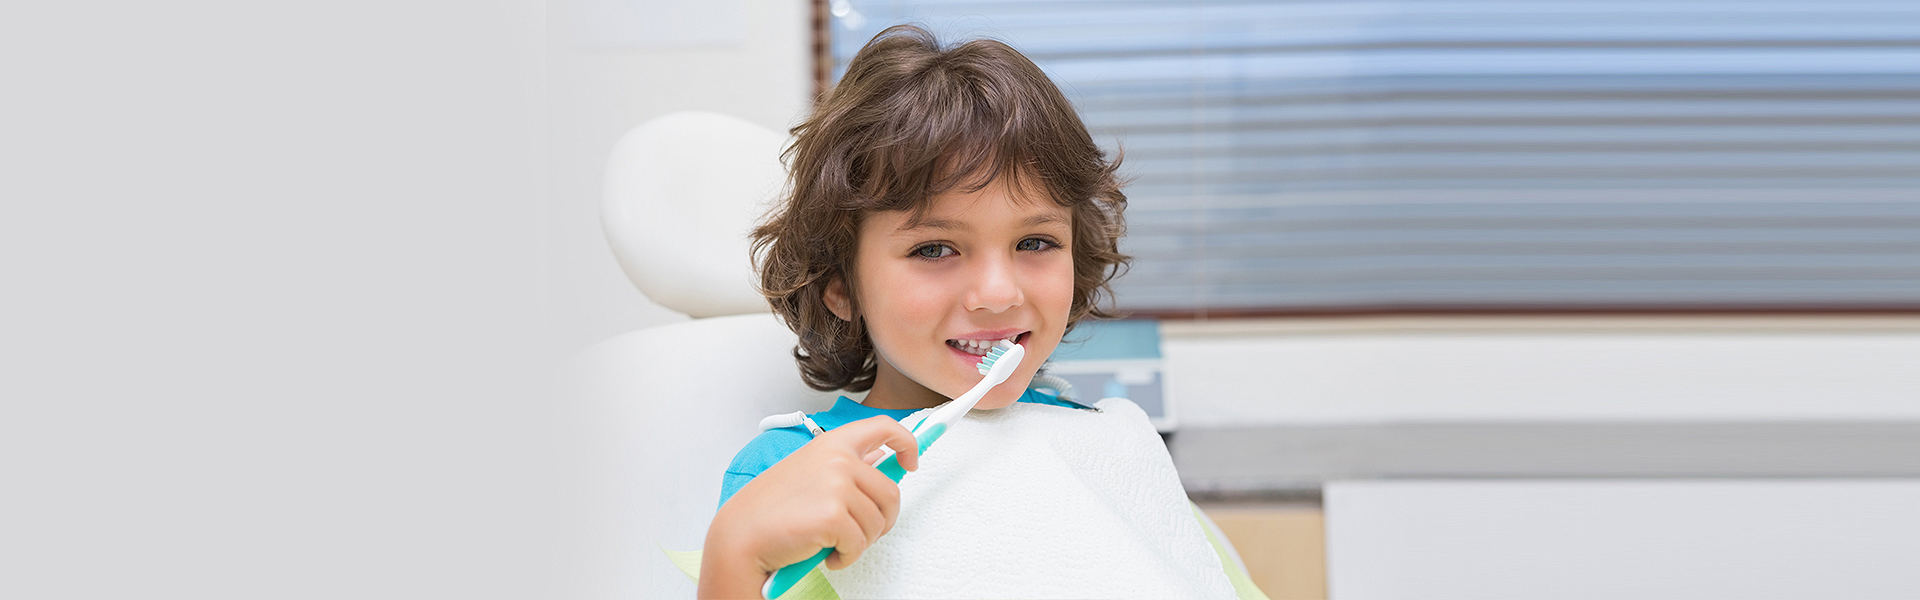 Children’s Dentistry: What Is It and Is it Important? 